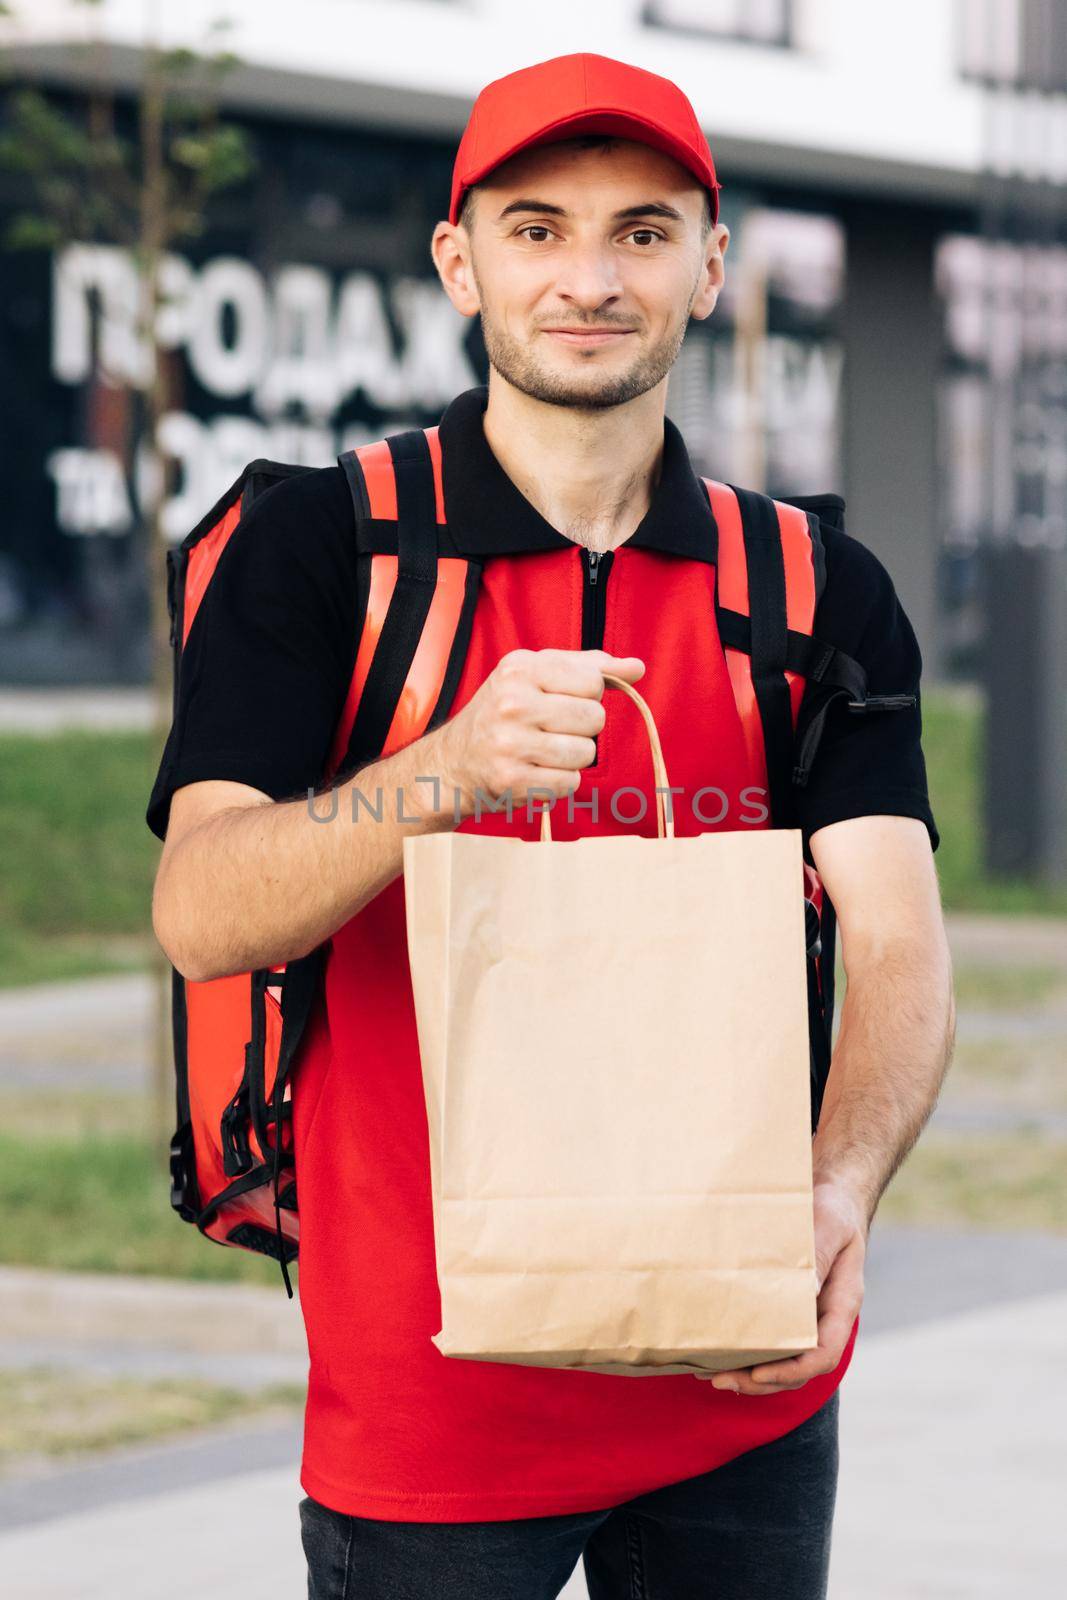 Outdoor portrait of delivery man with red uniform holding food bags waiting for customer. Happy young courier is proud of his job smiling standing in the street. Home delivery by uflypro